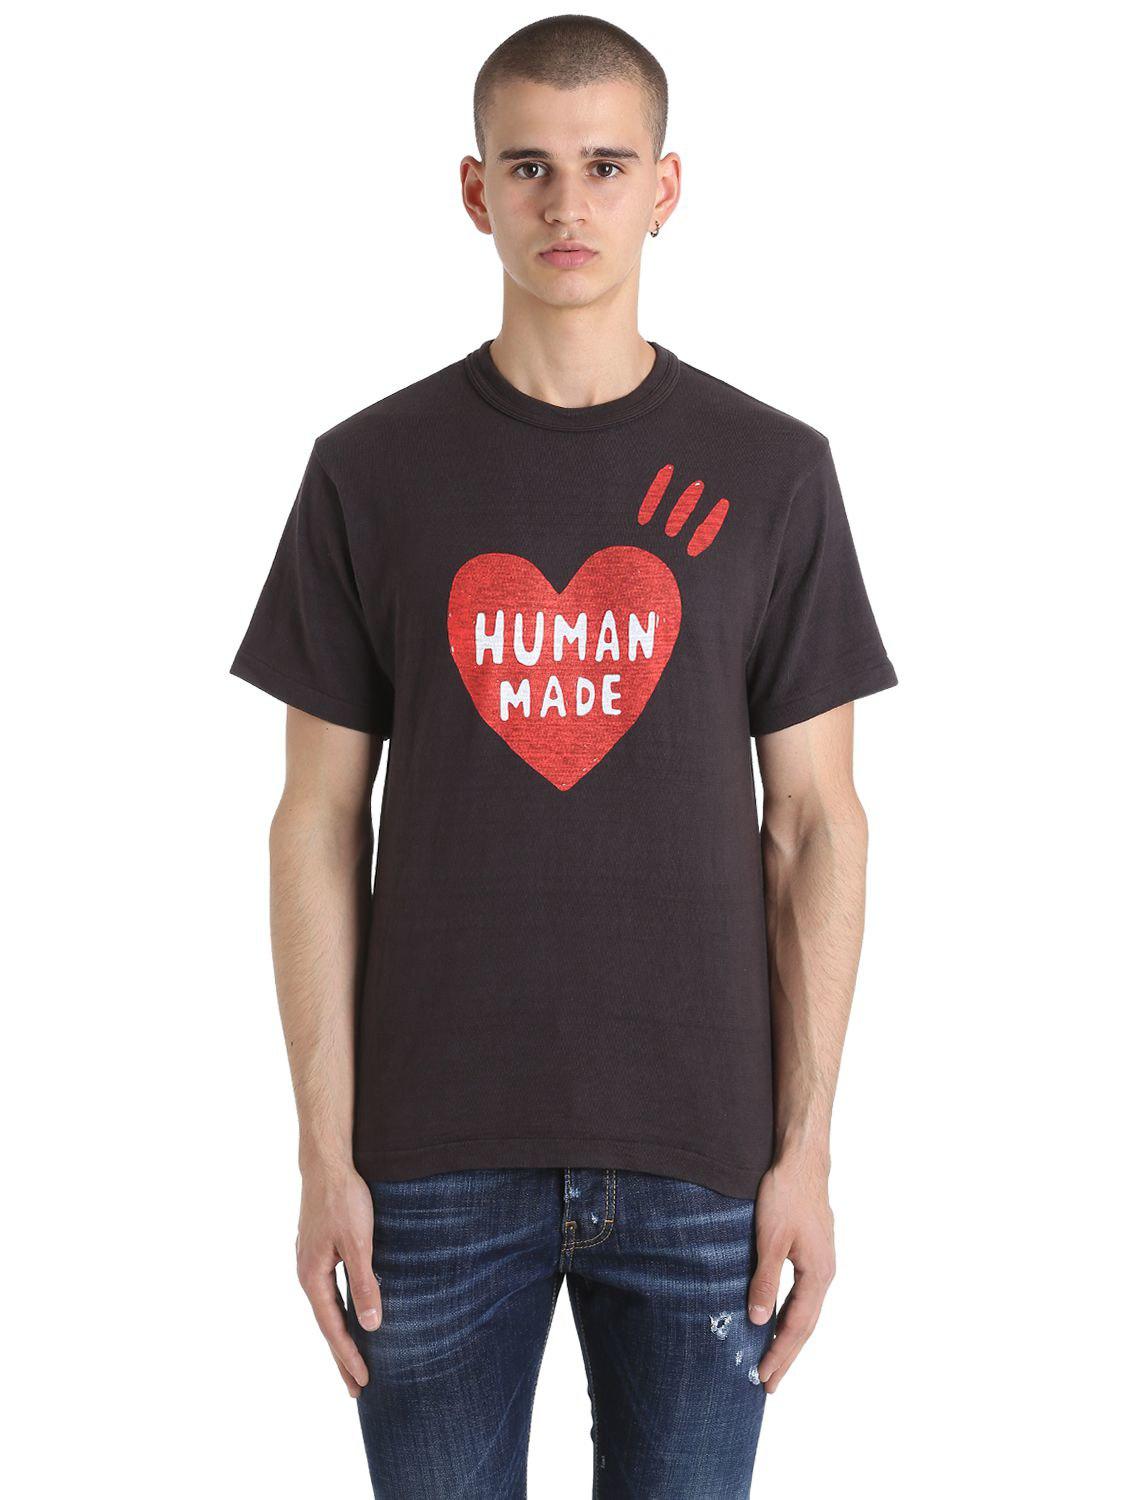 Lyst - Human Made Printed Cotton T-shirt in Black